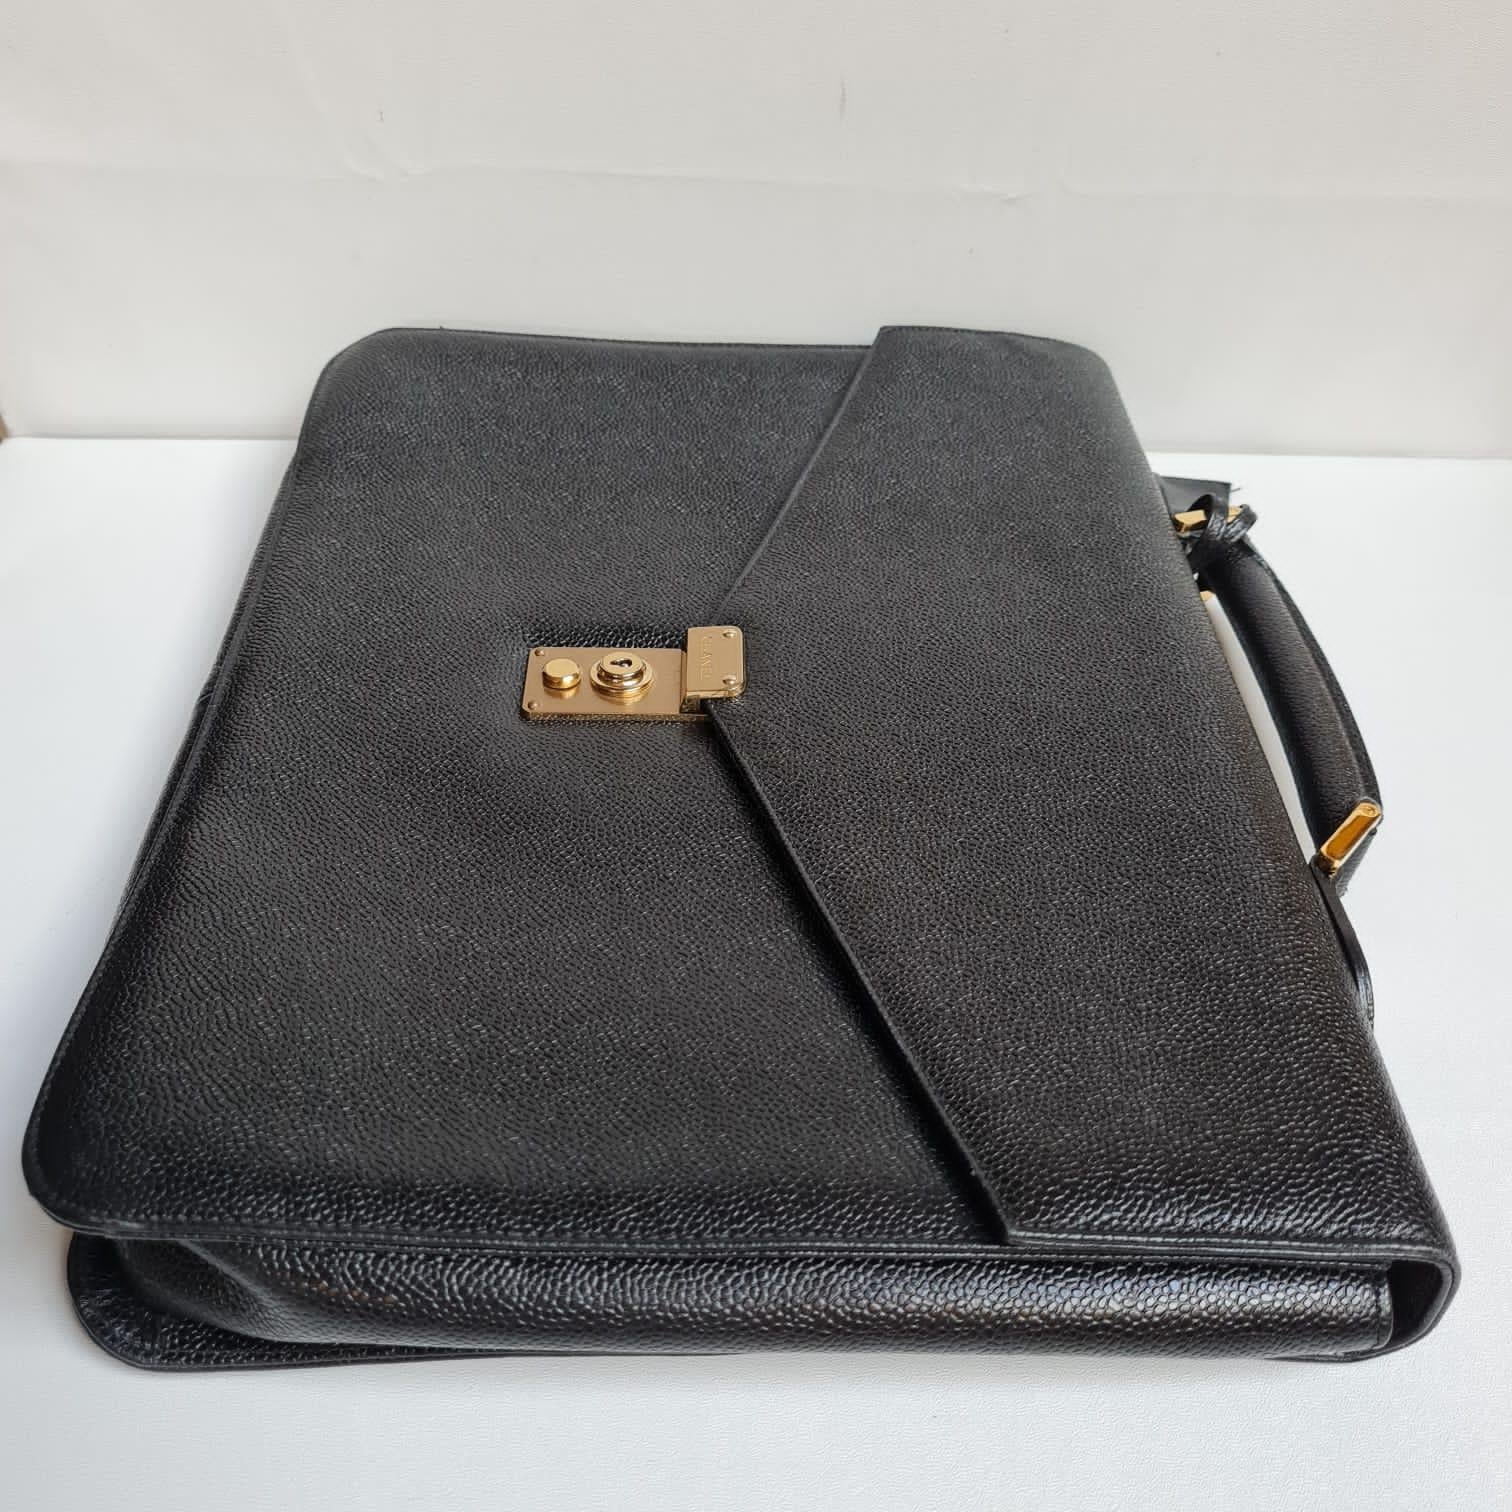 Vintage 90s caviar top handle briefcase. Item is still in great condition. Item #3. Item comes as it is with the clochette attached.